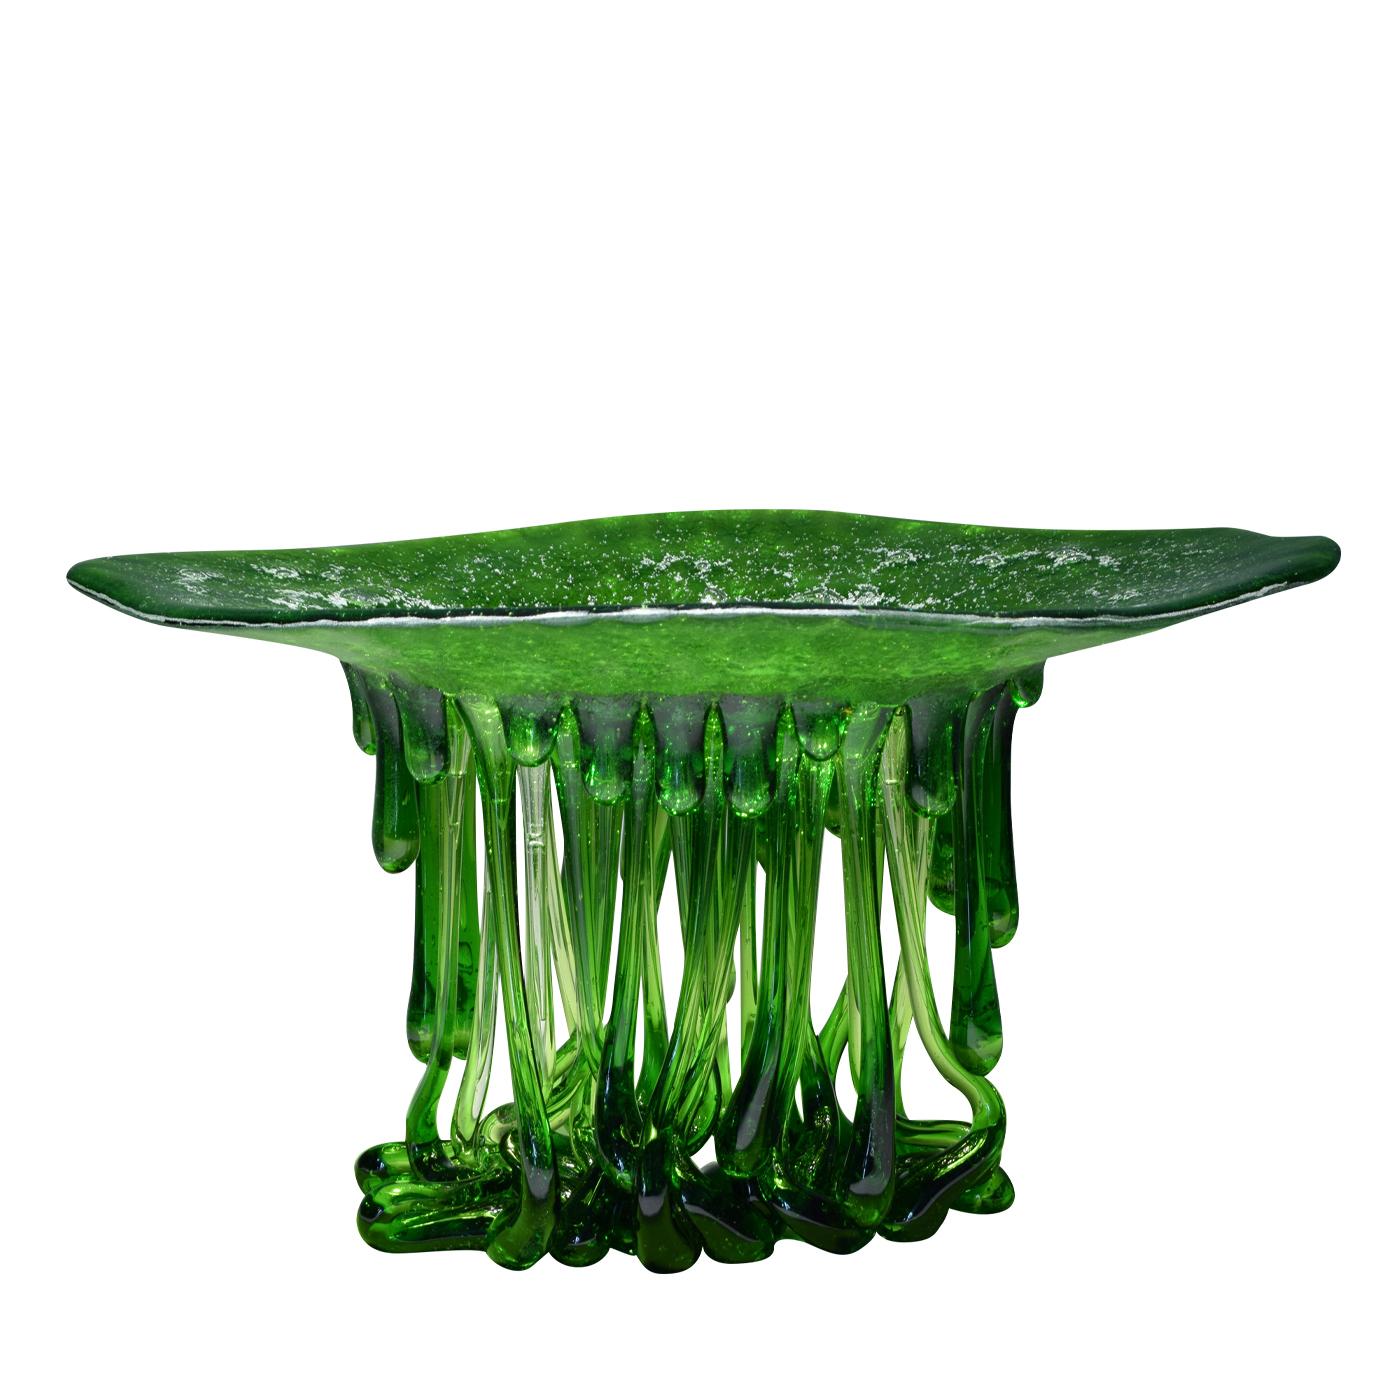 This beautiful green sculpture made from Murano glass creates a pool of color on surfaces on which it rests thanks to light filtering through the glass. The shape of this piece conjures up jellyfish in the mind, as the sculpture has a flower-shaped